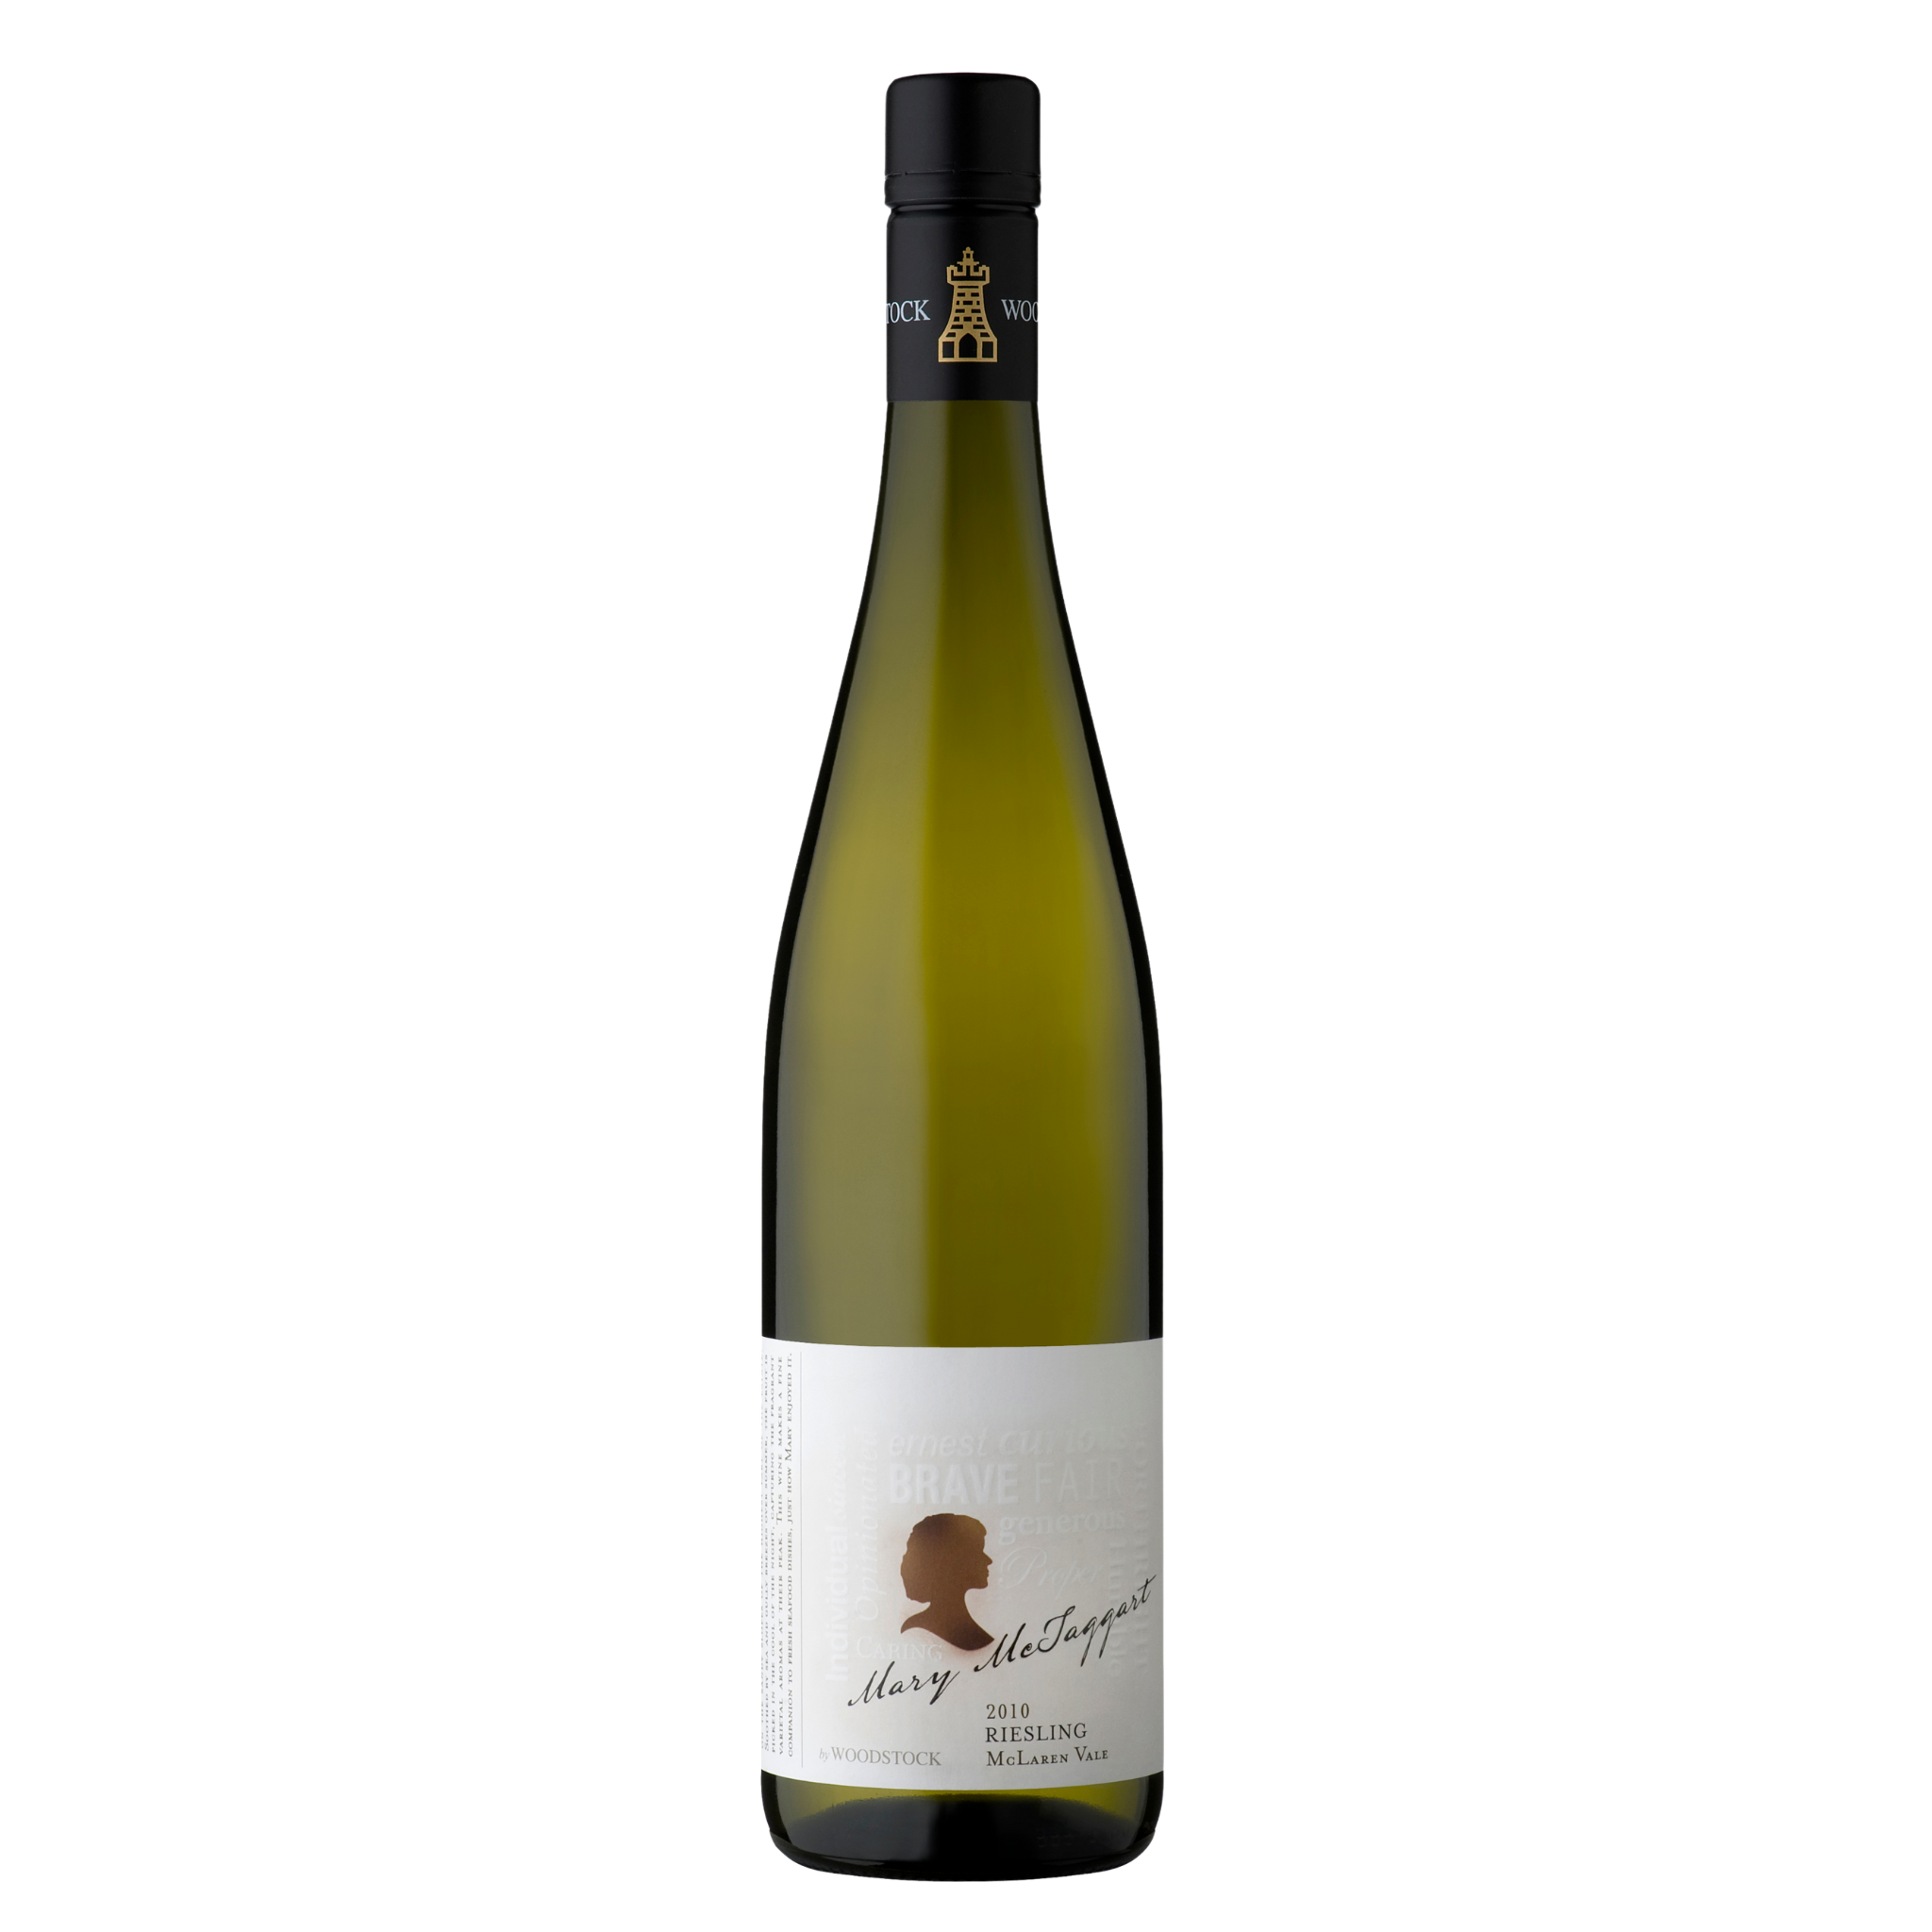 Museum Release 'Mary McTaggart' Riesling 2012